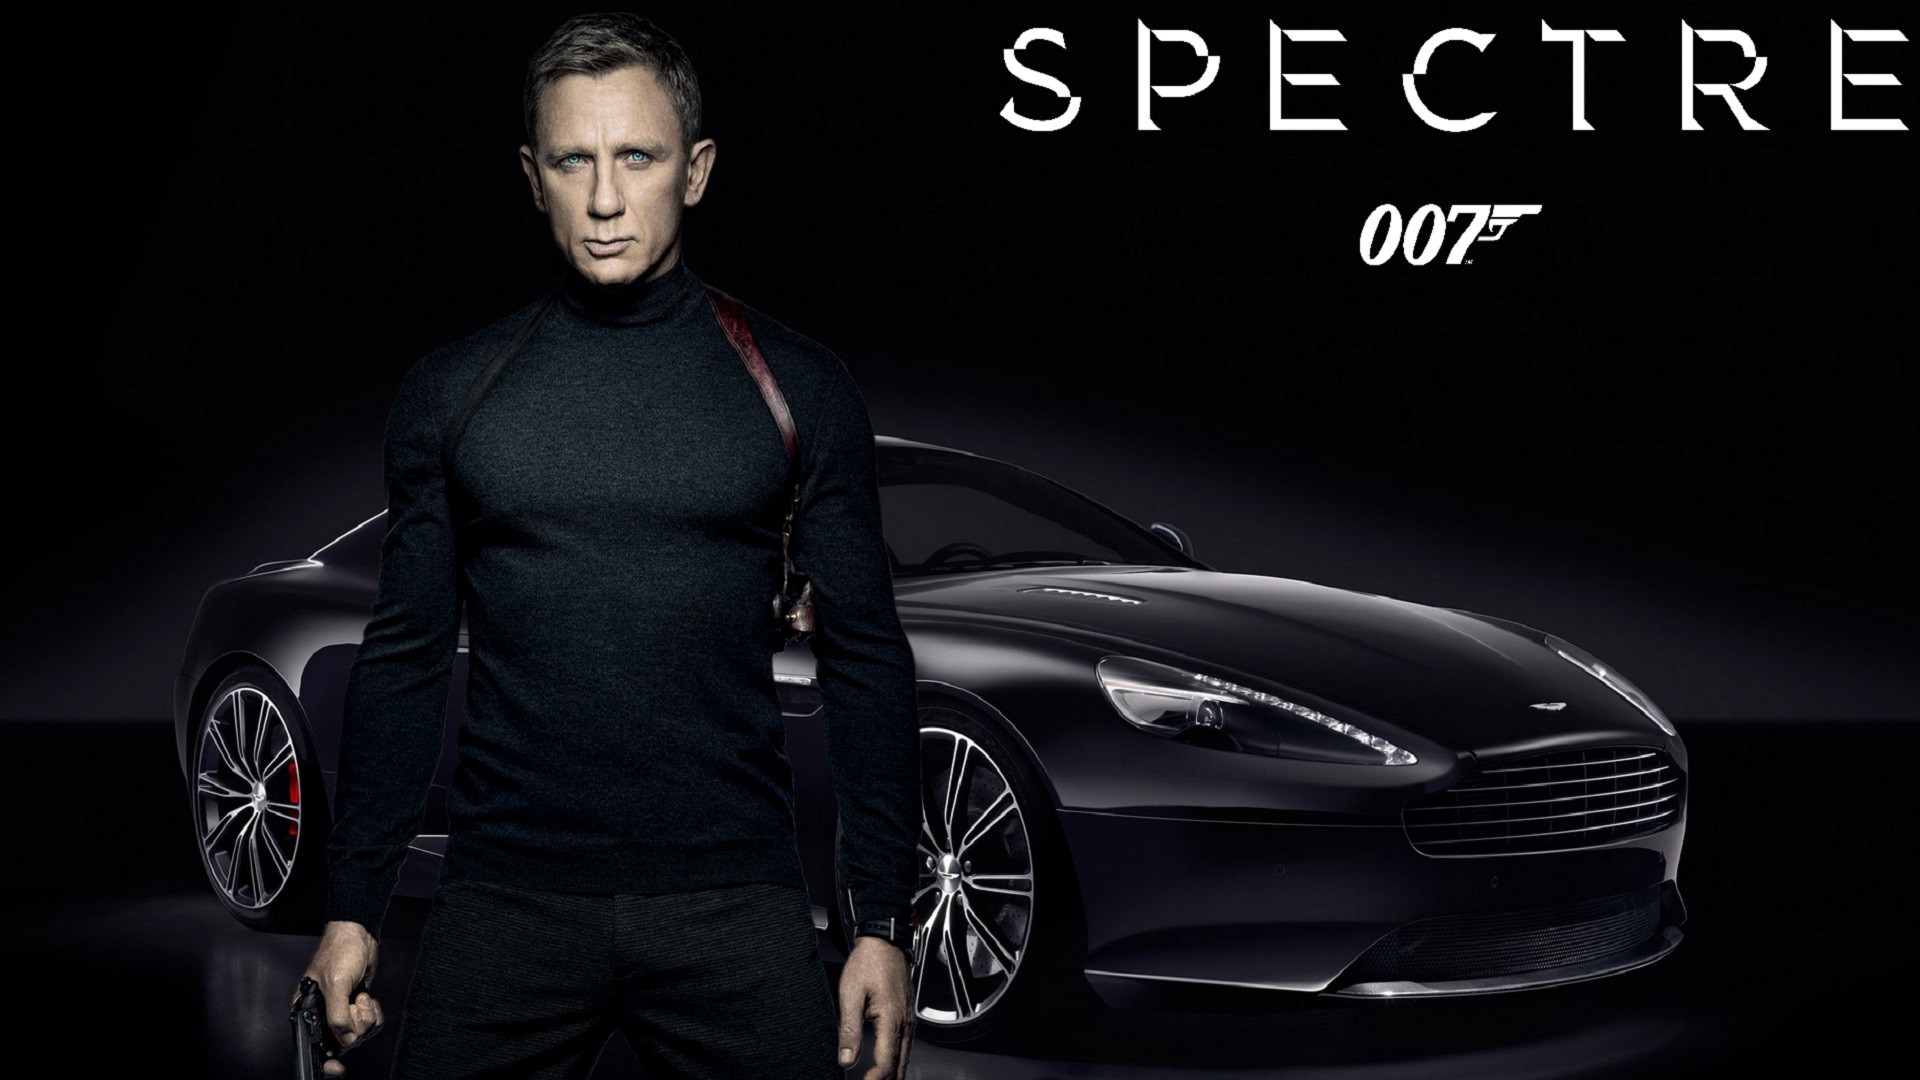 1920x1080 Spectre 007 movies HD Wallpapers download